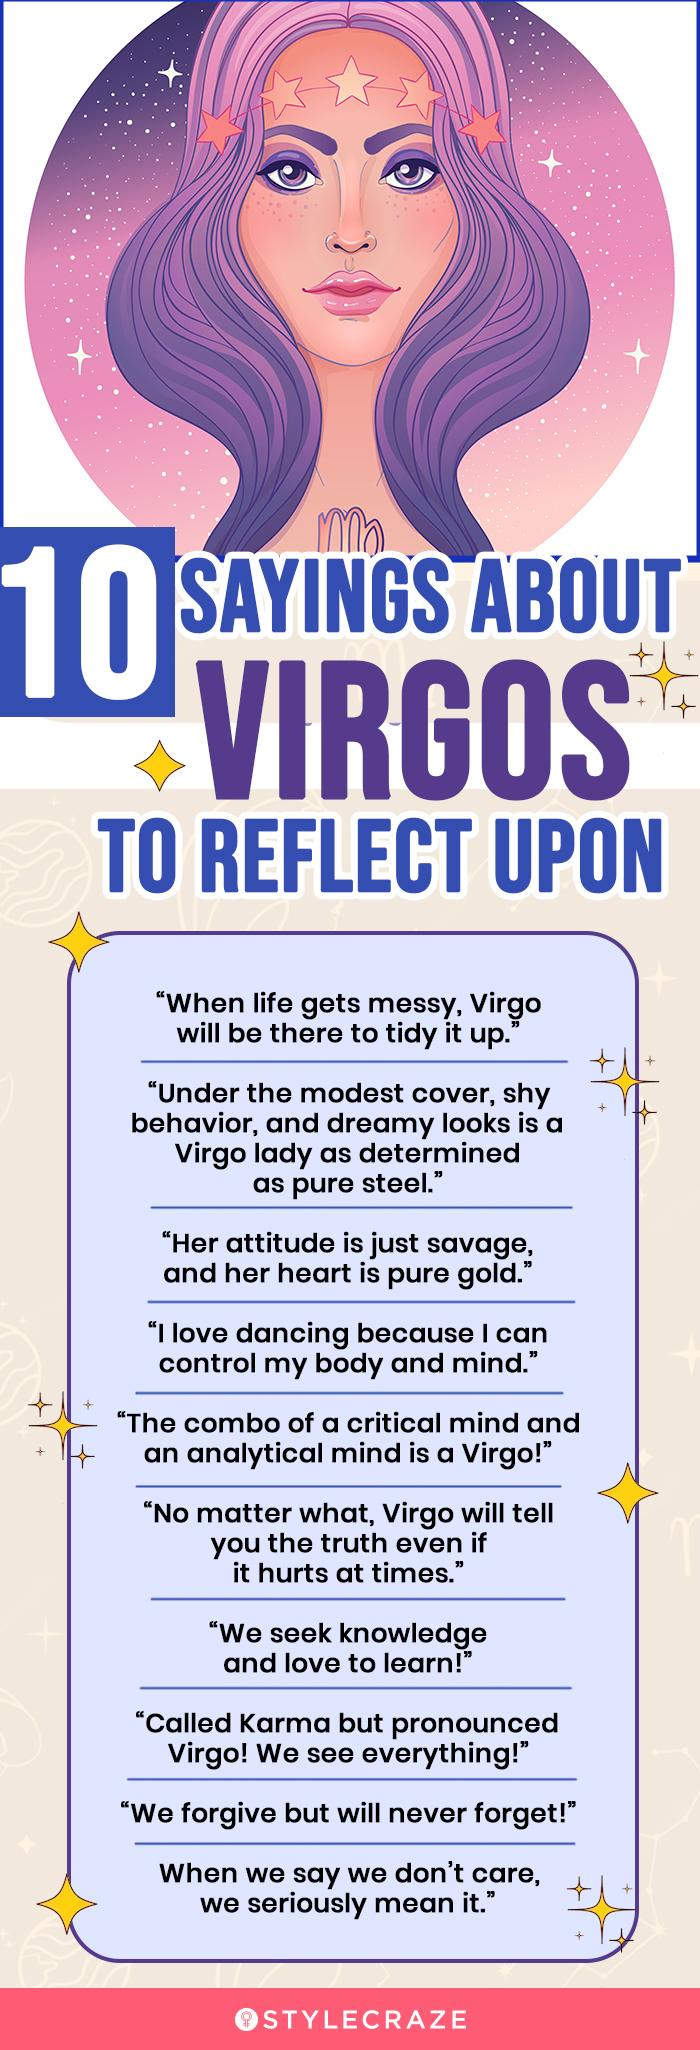 10 sayings about virgos to reflect upon (infographic)